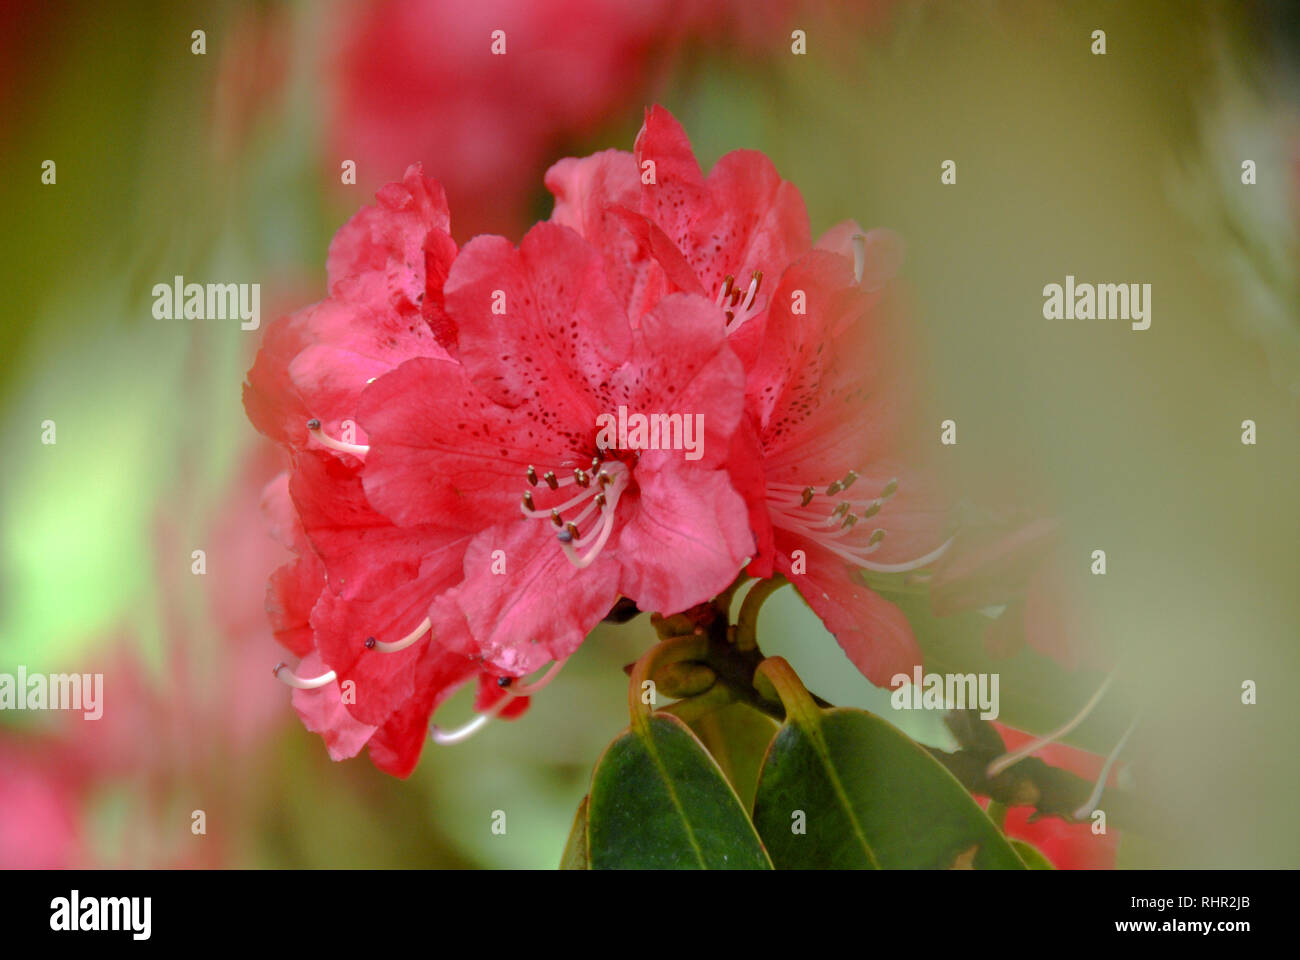 Red Rhododendron flower with green defocused background Stock Photo